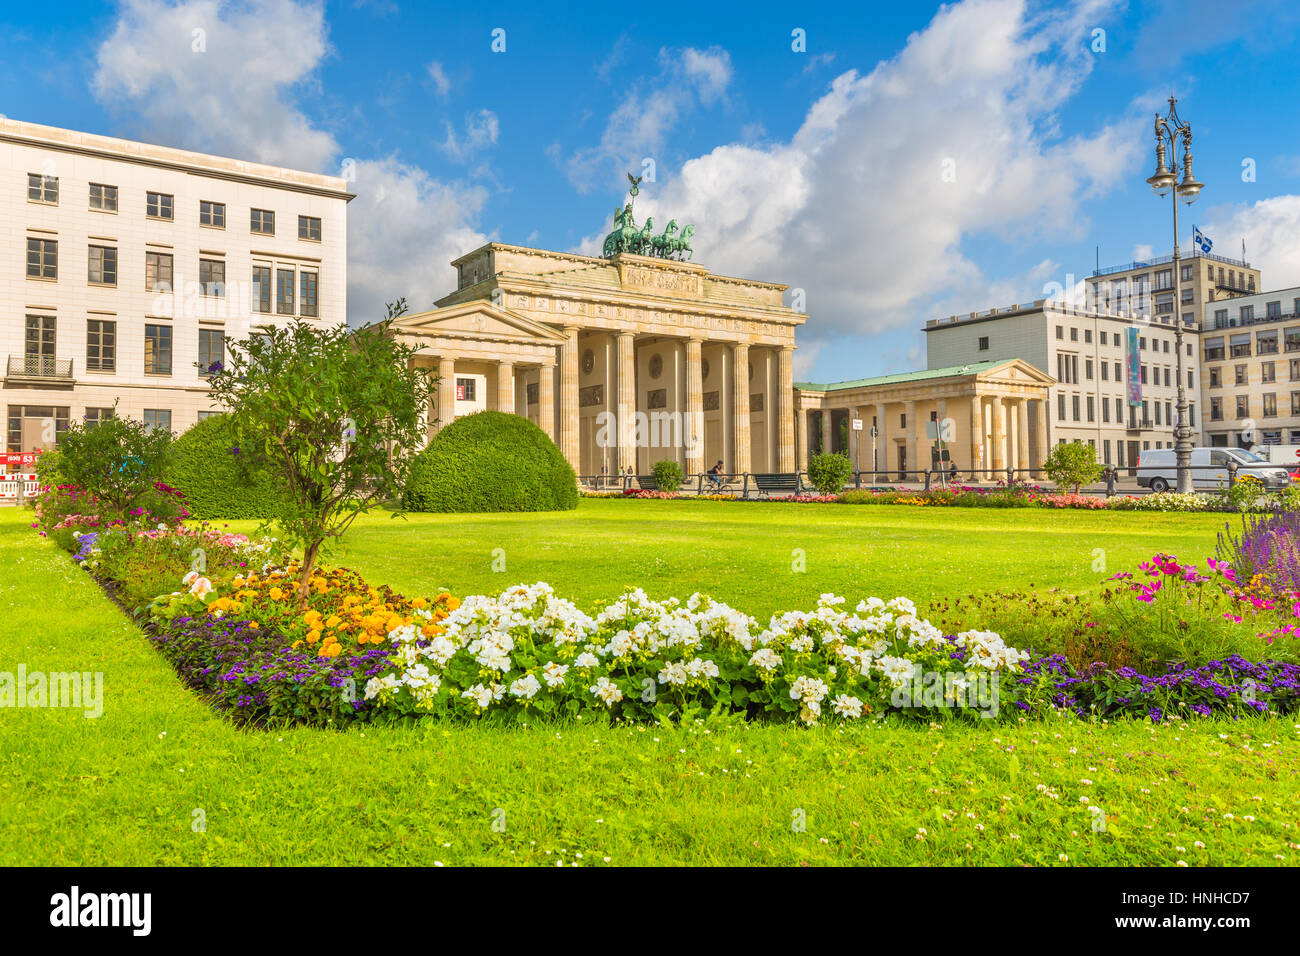 Classic view of famous Brandenburg Gate at Pariser Platz, a national symbol of Germany, on a beautiful sunny day with blue sky in summer, Berlin Mitte Stock Photo